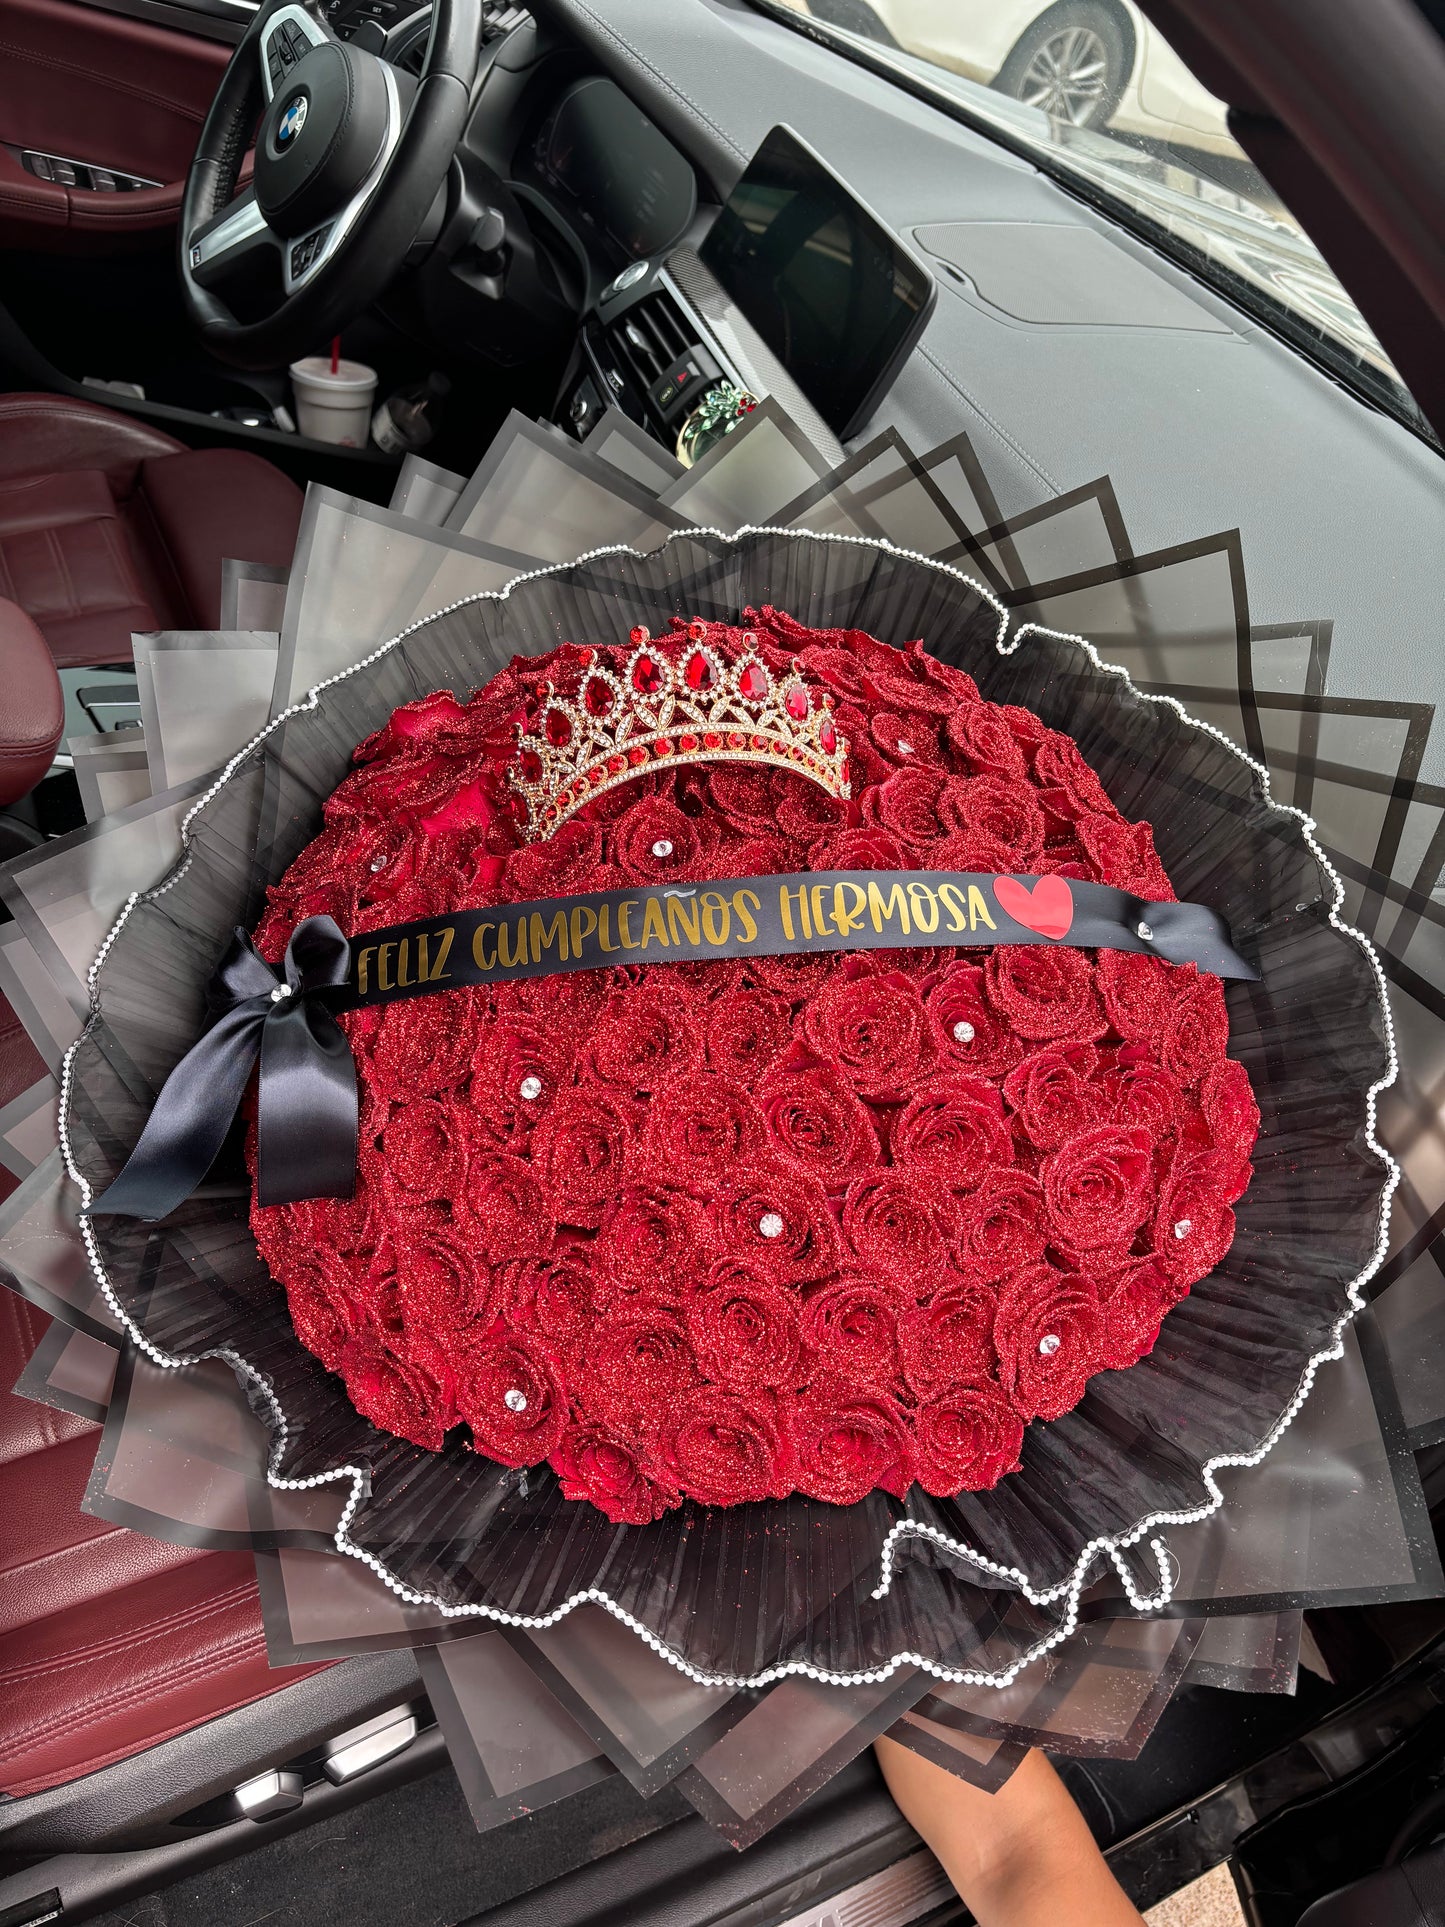 100 Red Glittered roses for My Queen❤️✨